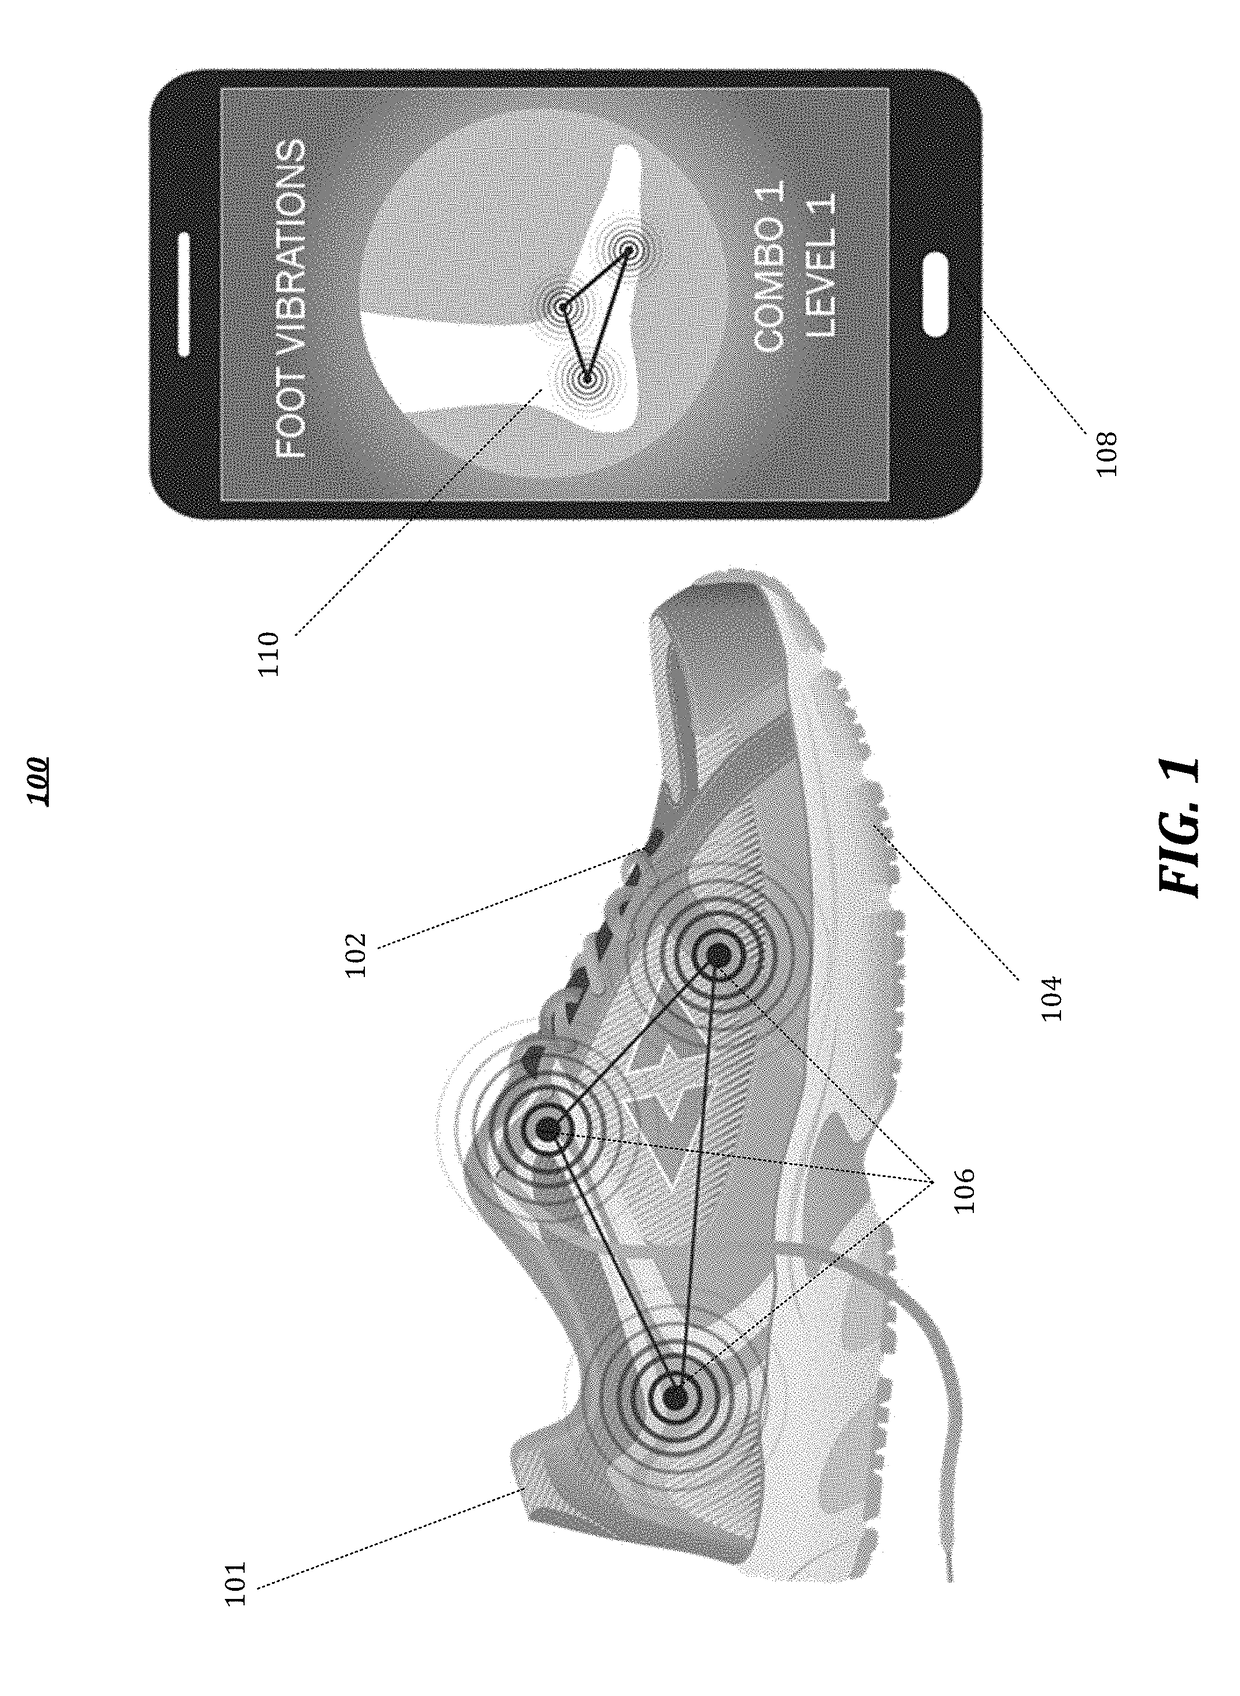 Pain reducing footwear and systems and methods for using same